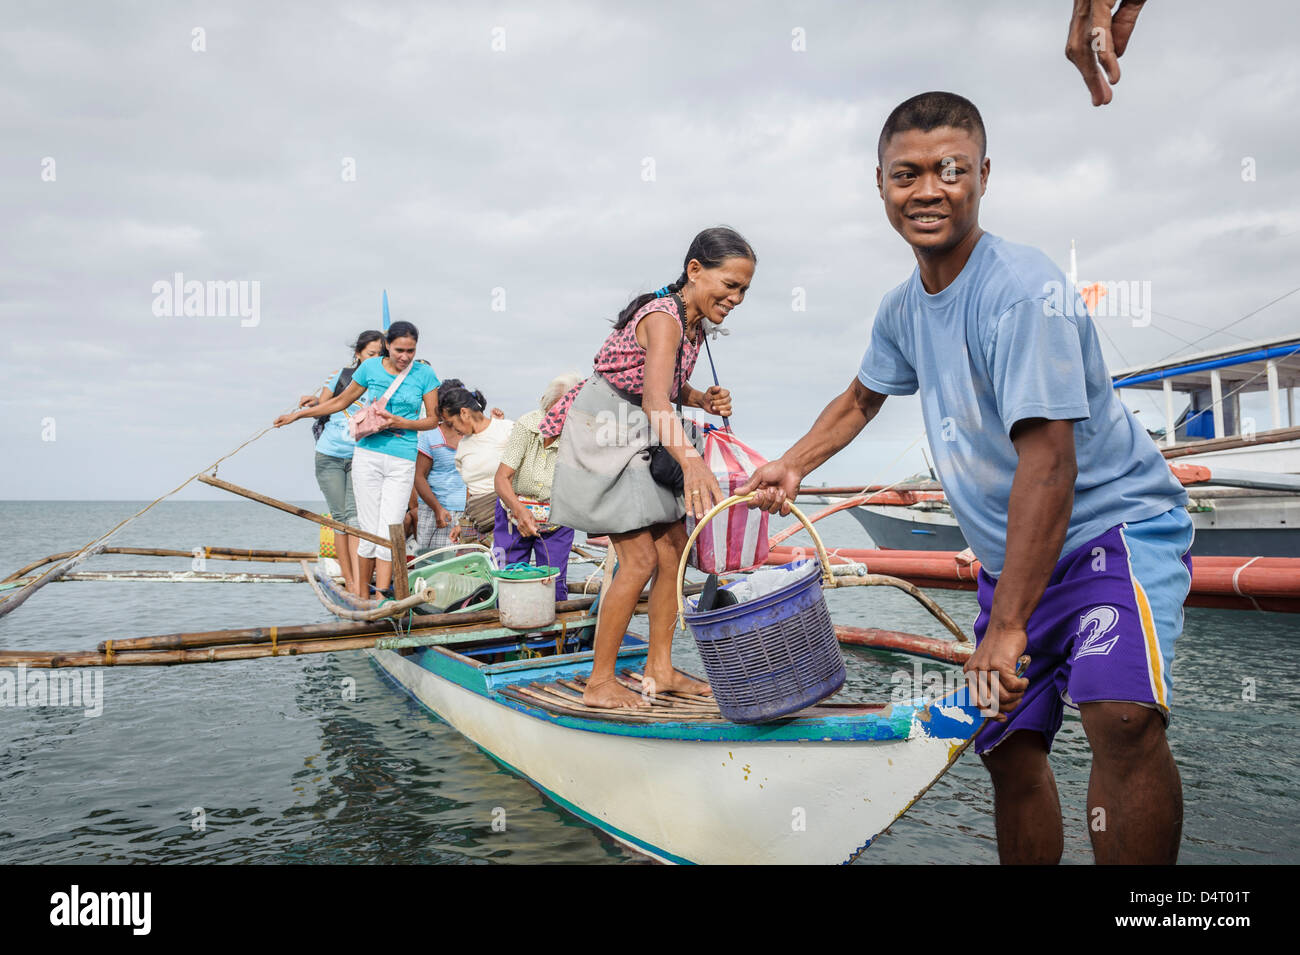 People disembarking from a small boat, Tablas island, Philippines, Asia. Stock Photo